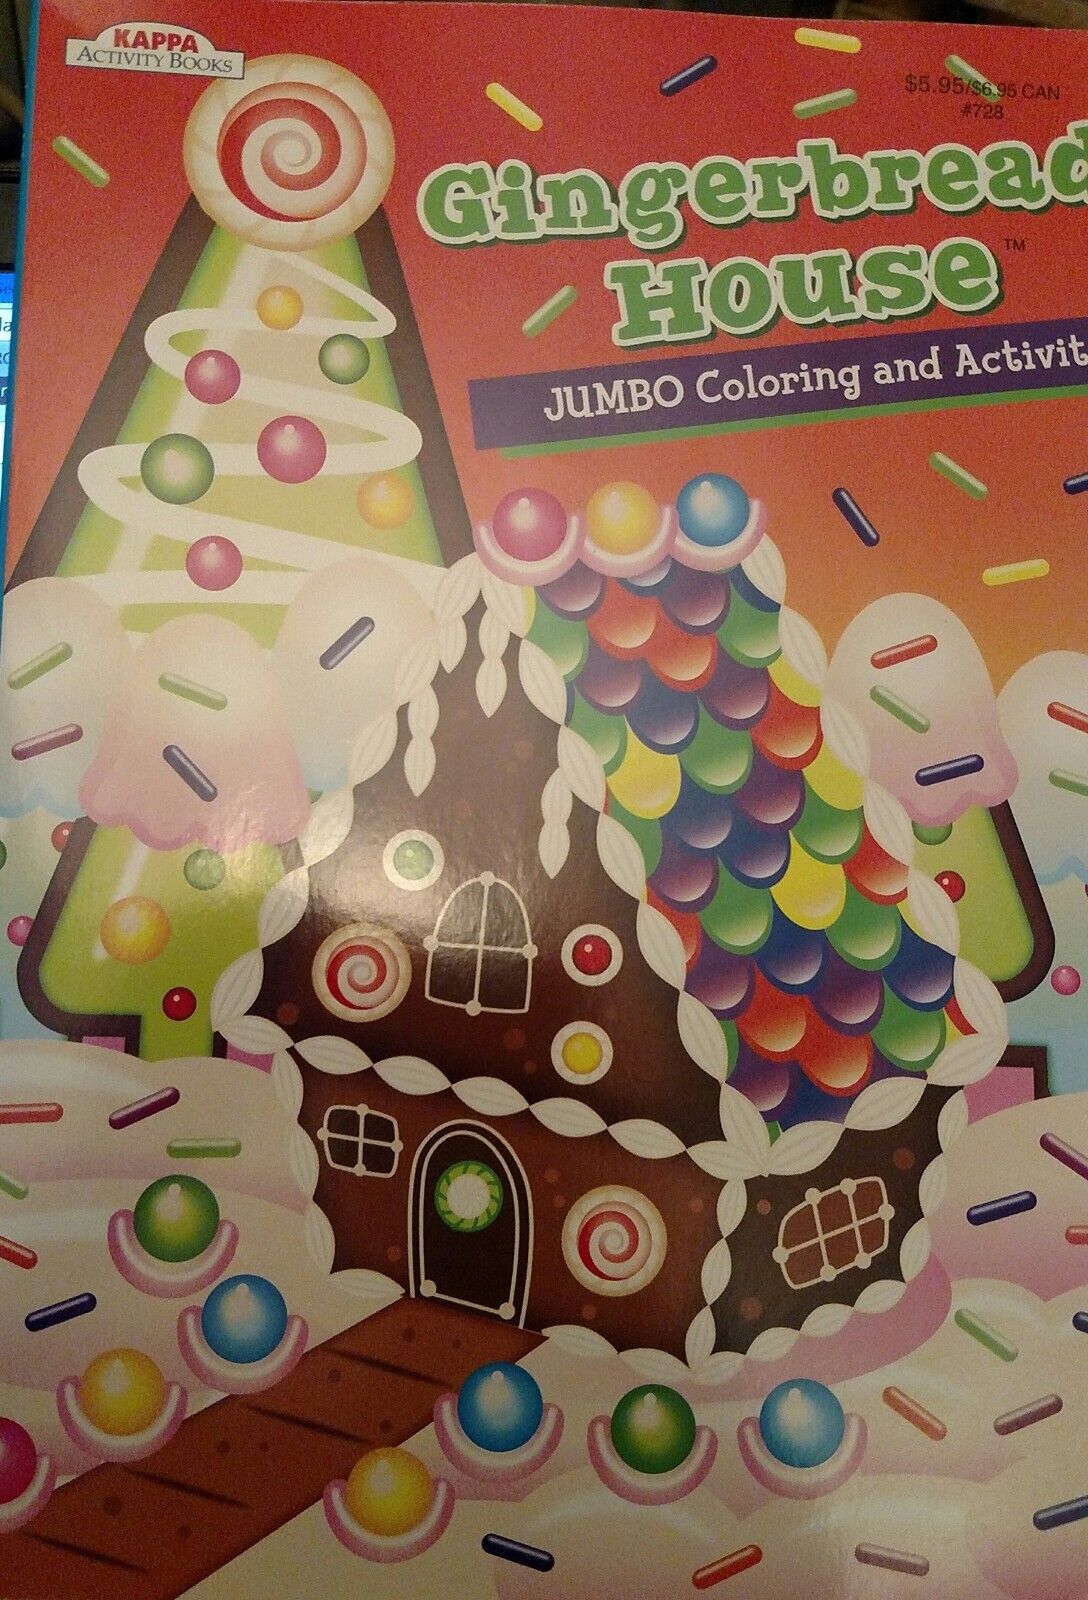 Gingerbread House Jumbo Coloring & Activity Book